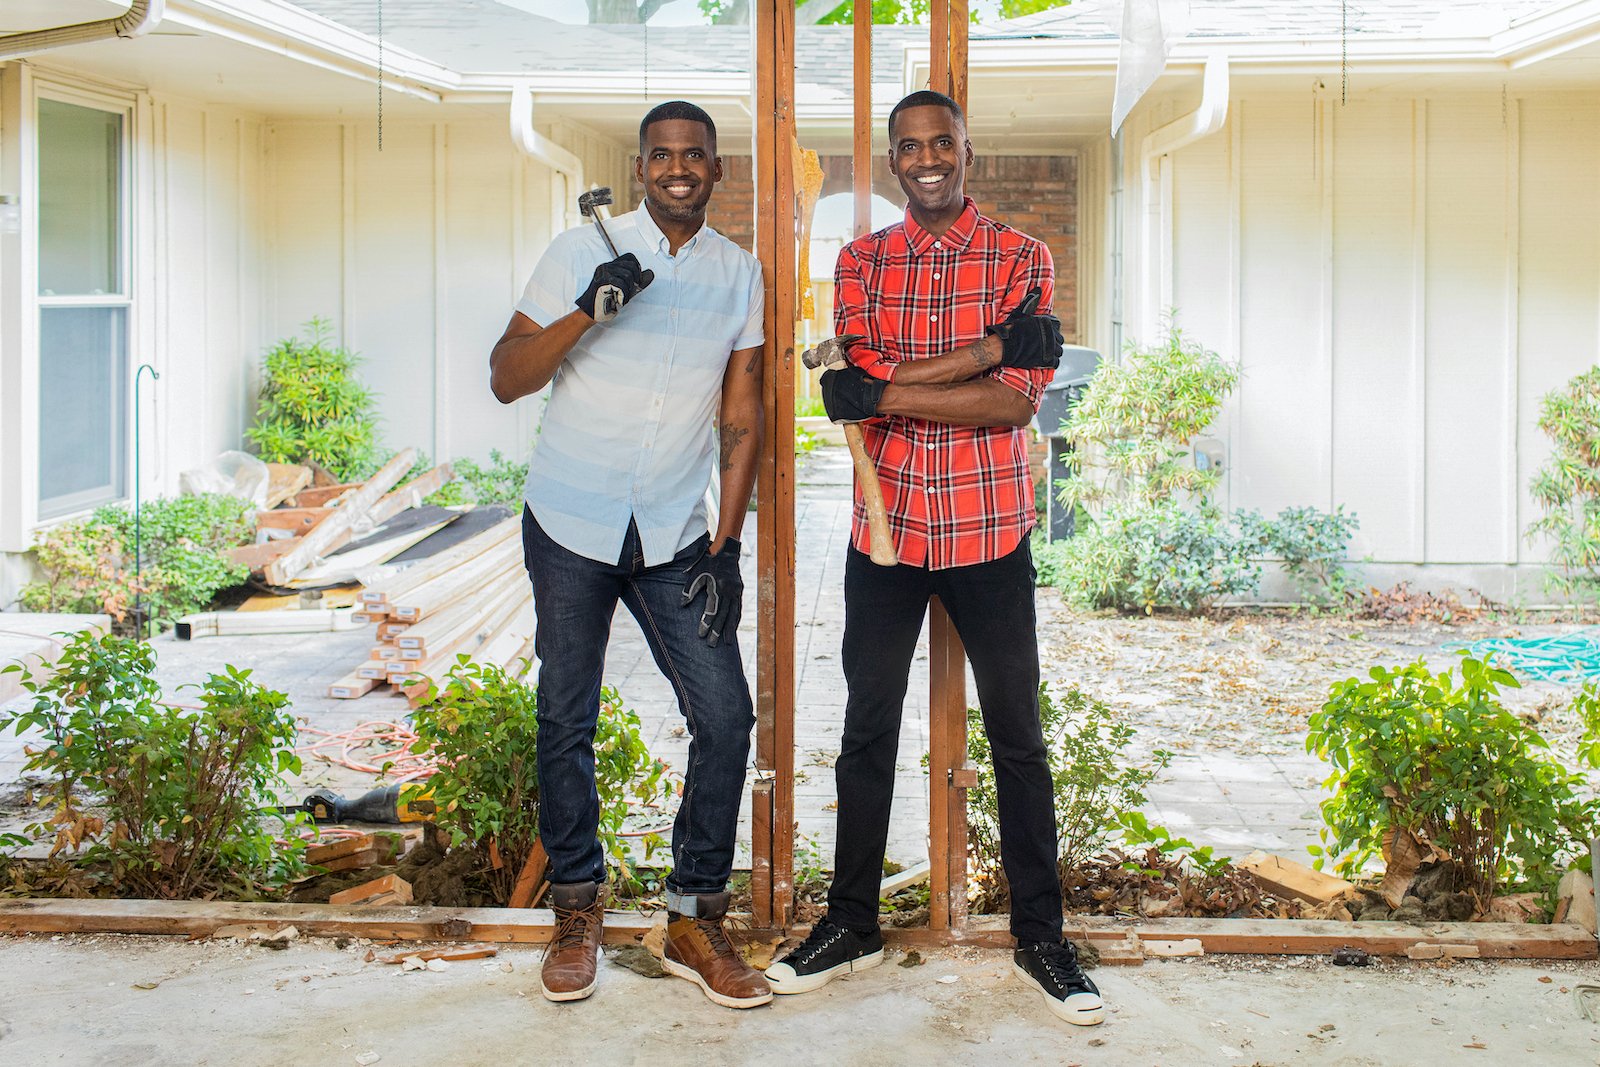 ‘Buy It or Build It’ HGTV Hosts Chris and Calvin LaMont’s Friendly Competition Keeps Client Top of Mind [Exclusive]